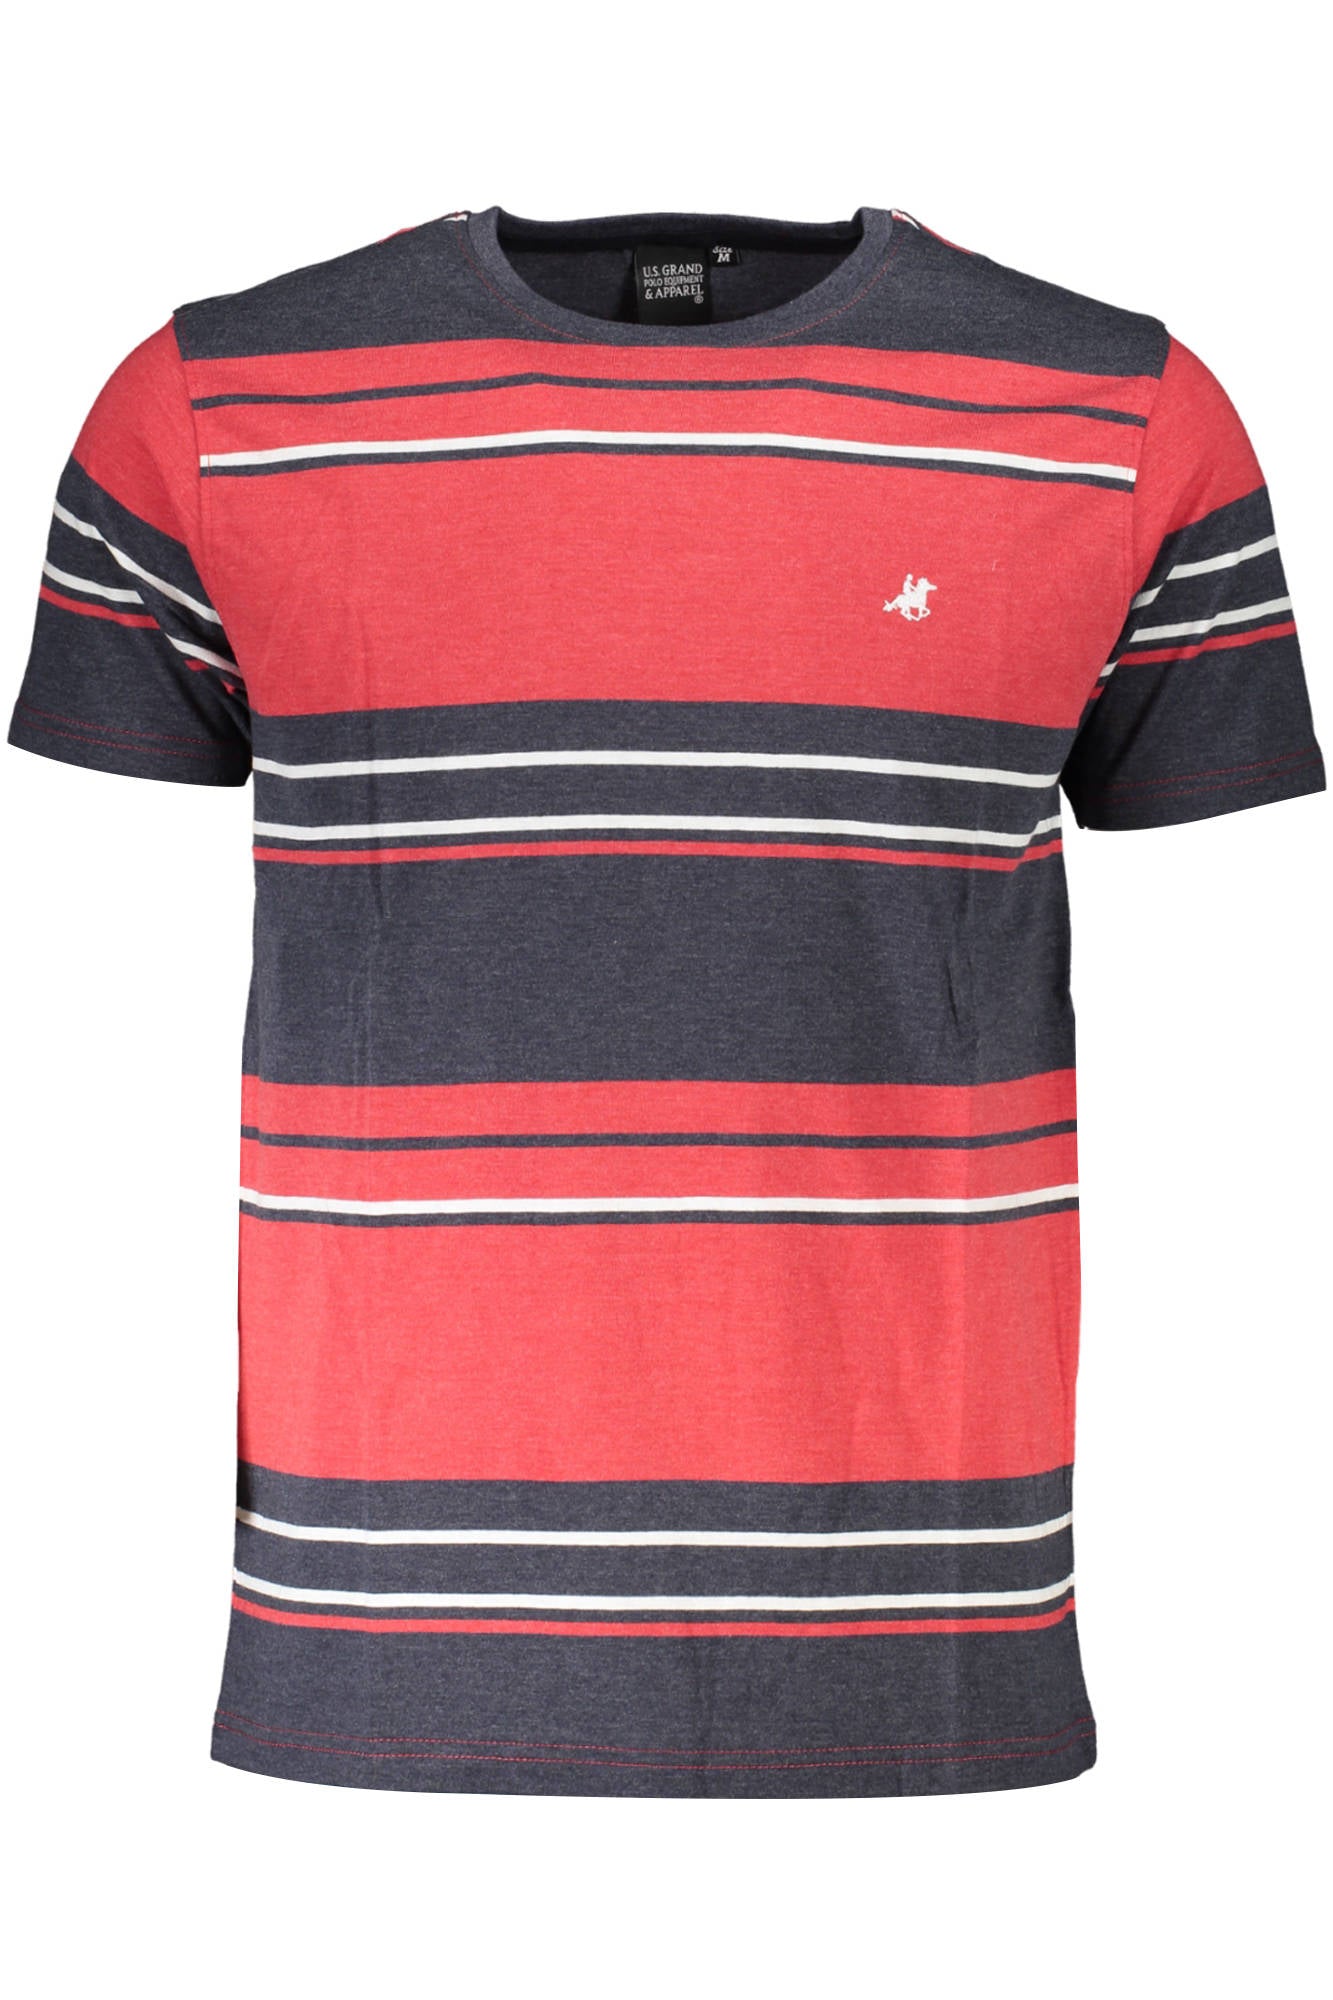 US GRAND POLO T-SHIRT SHORT SLEEVE MAN RED